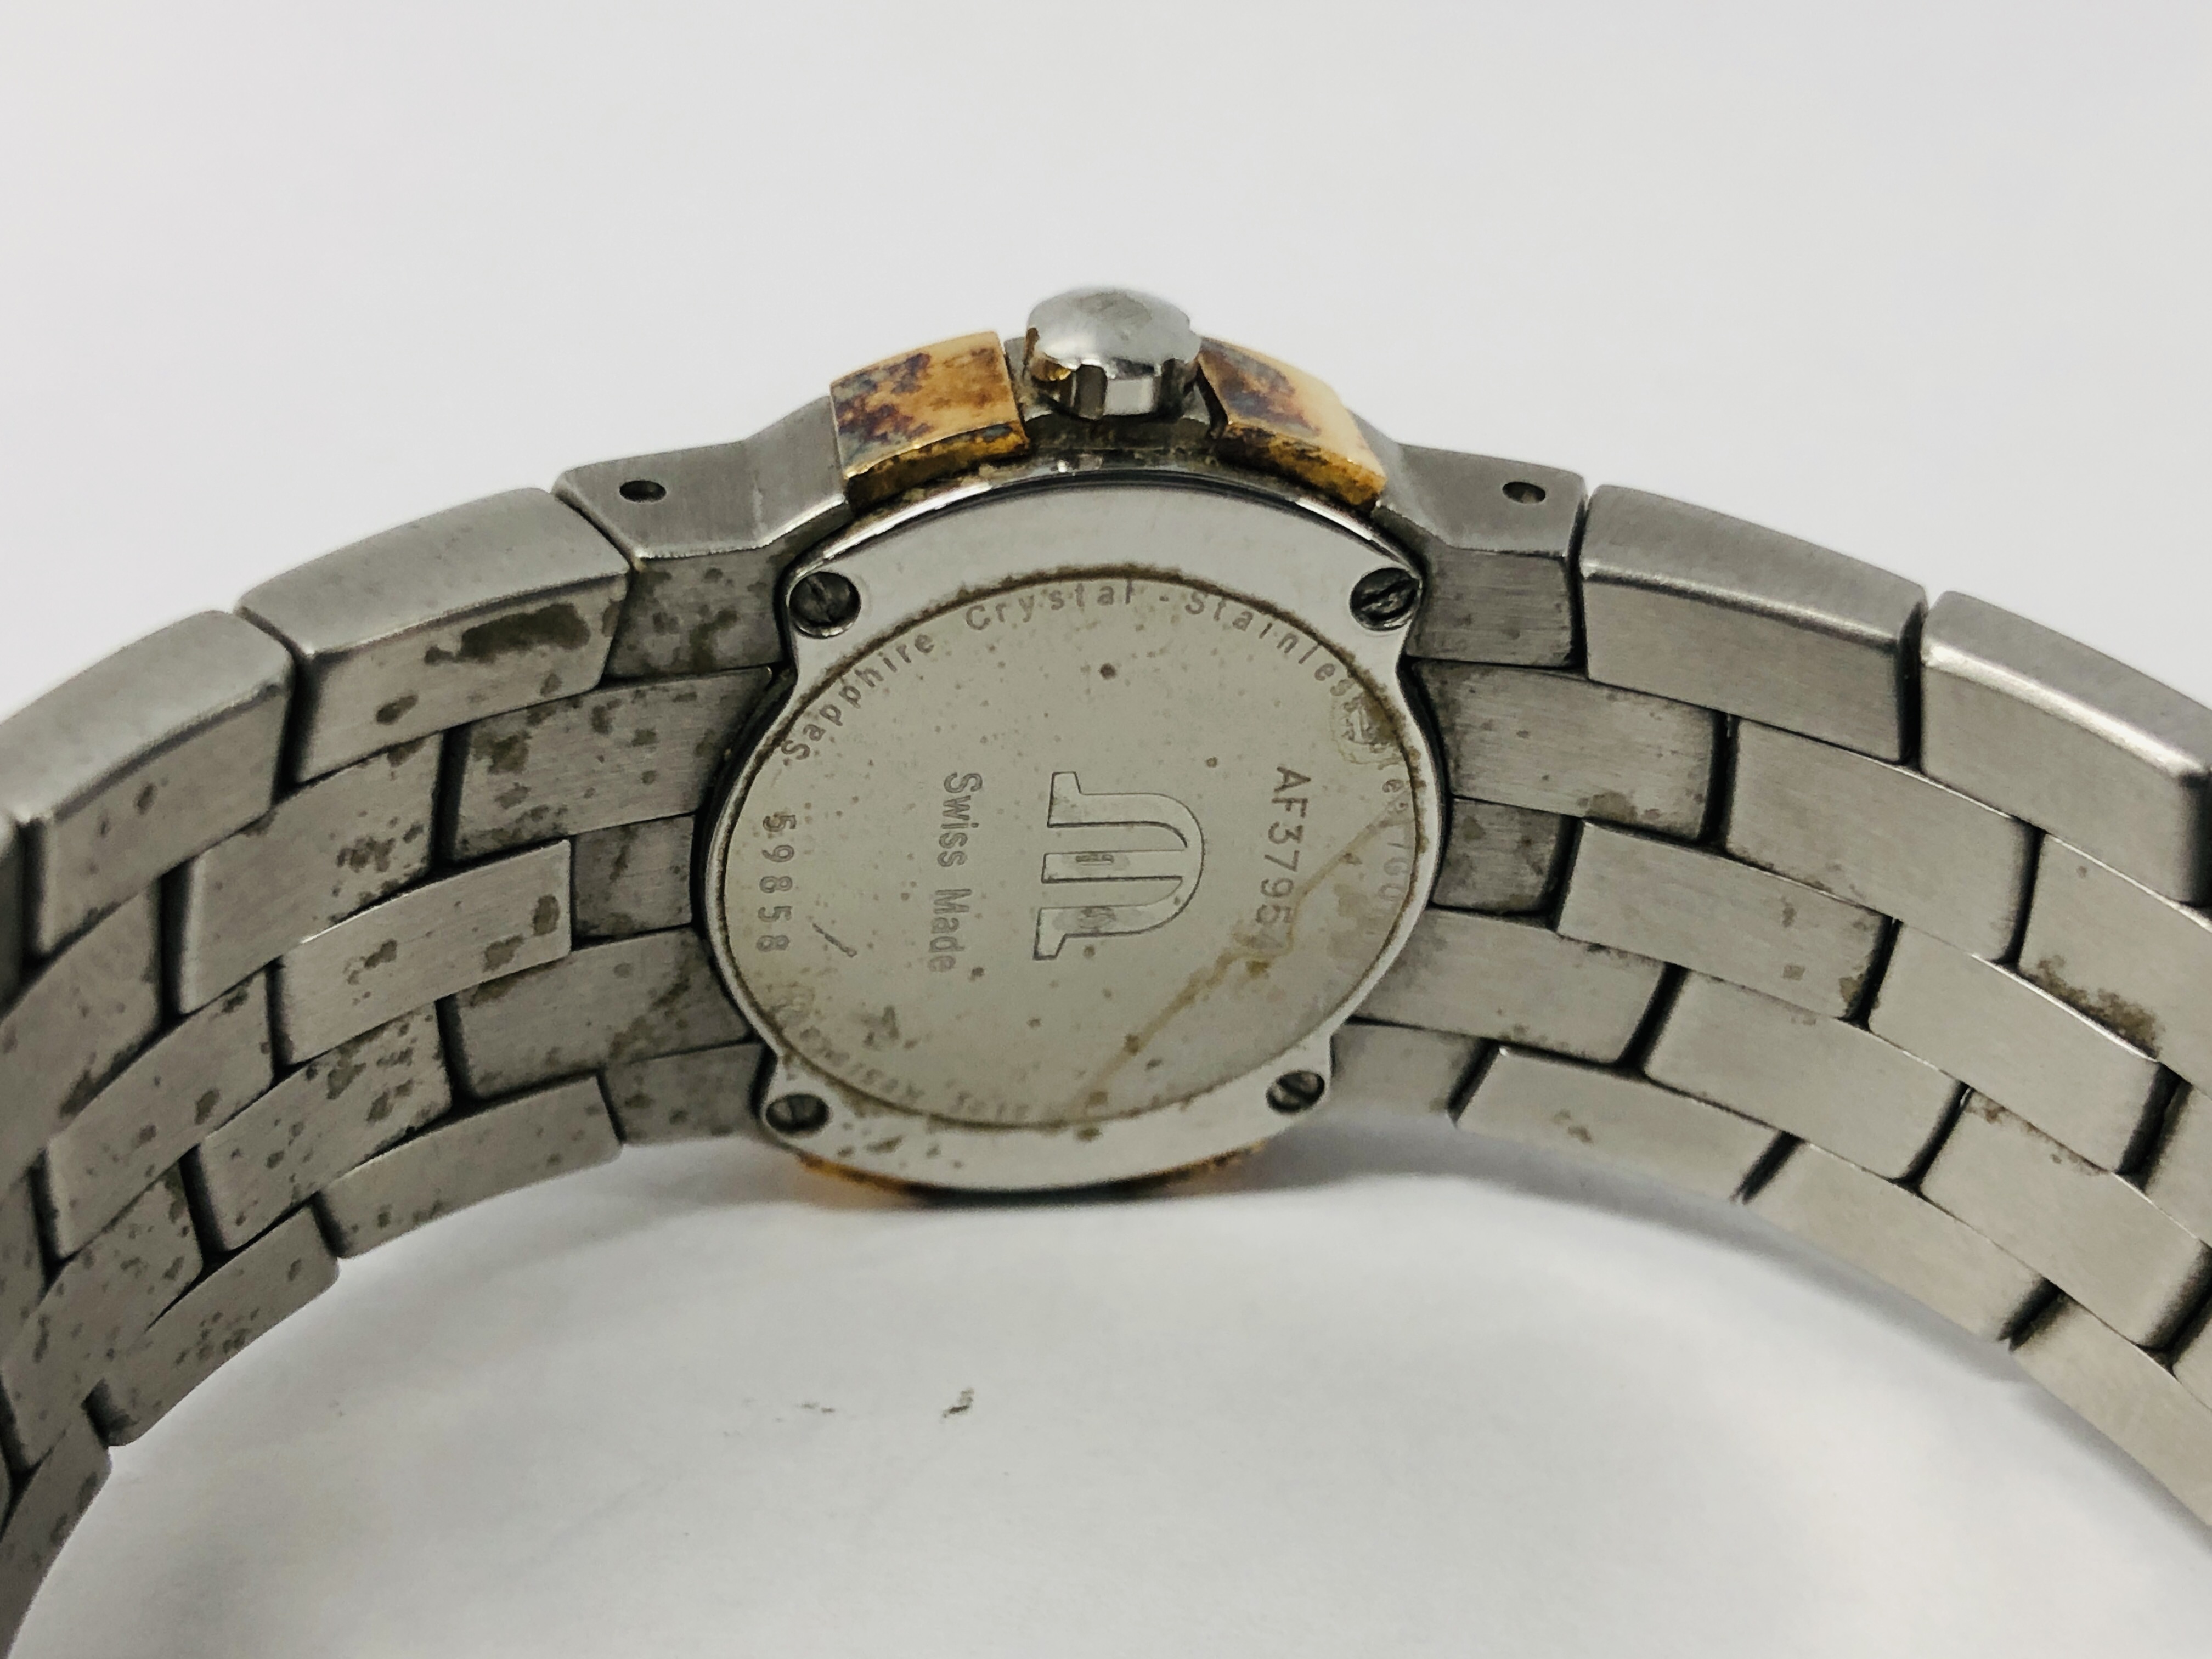 LADIES MAURICE LACROIX BRACELET WATCH THE CASE MARKED STAINLESS STEEL AND 18K 750 - Image 7 of 7